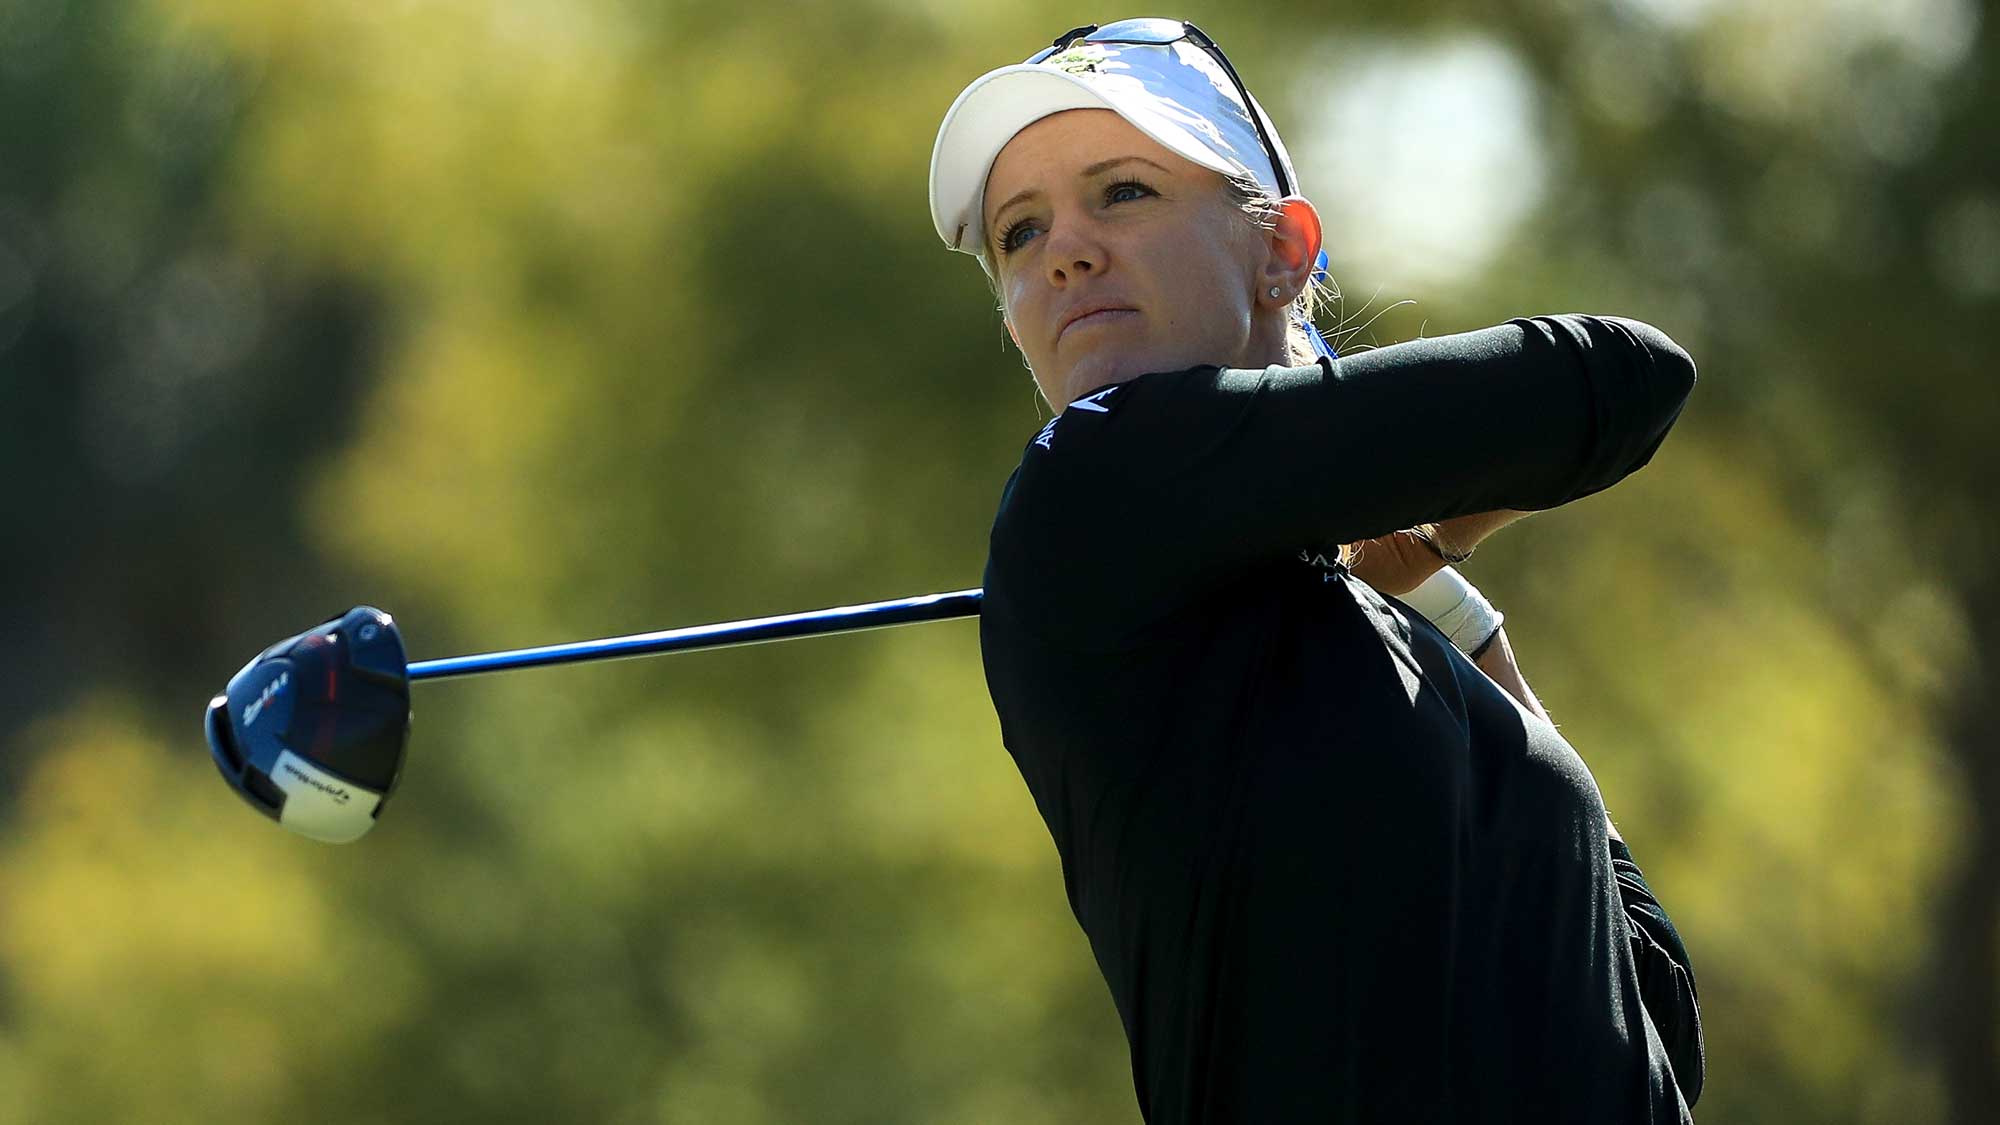 Amy Olson plays her shot from the third tee during the third round of the LPGA CME Group Tour Championship